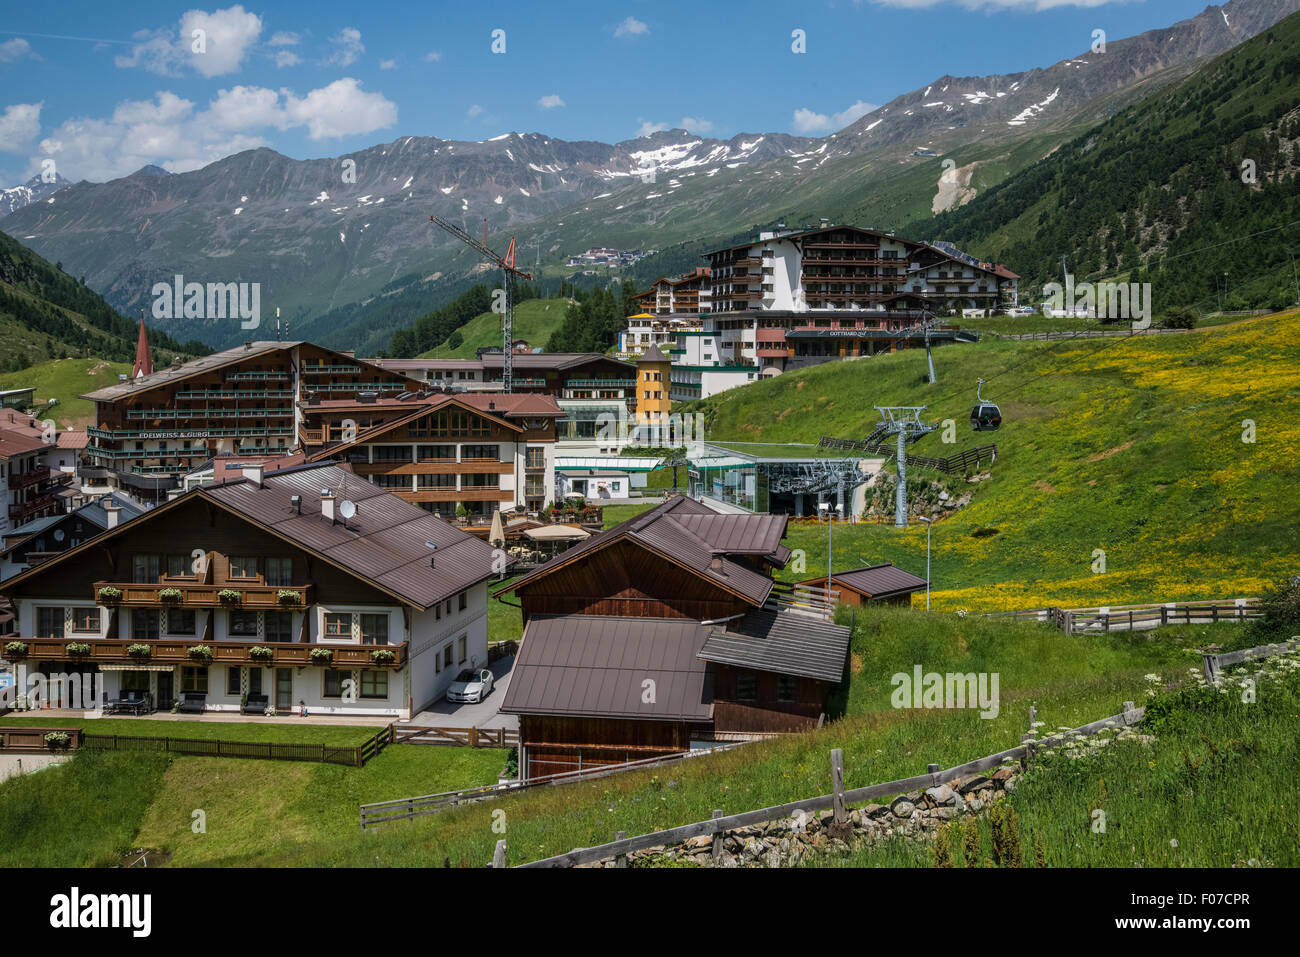 Images in and around the Tyrolean village of  Obergurgl The village of Obergurgl Stock Photo